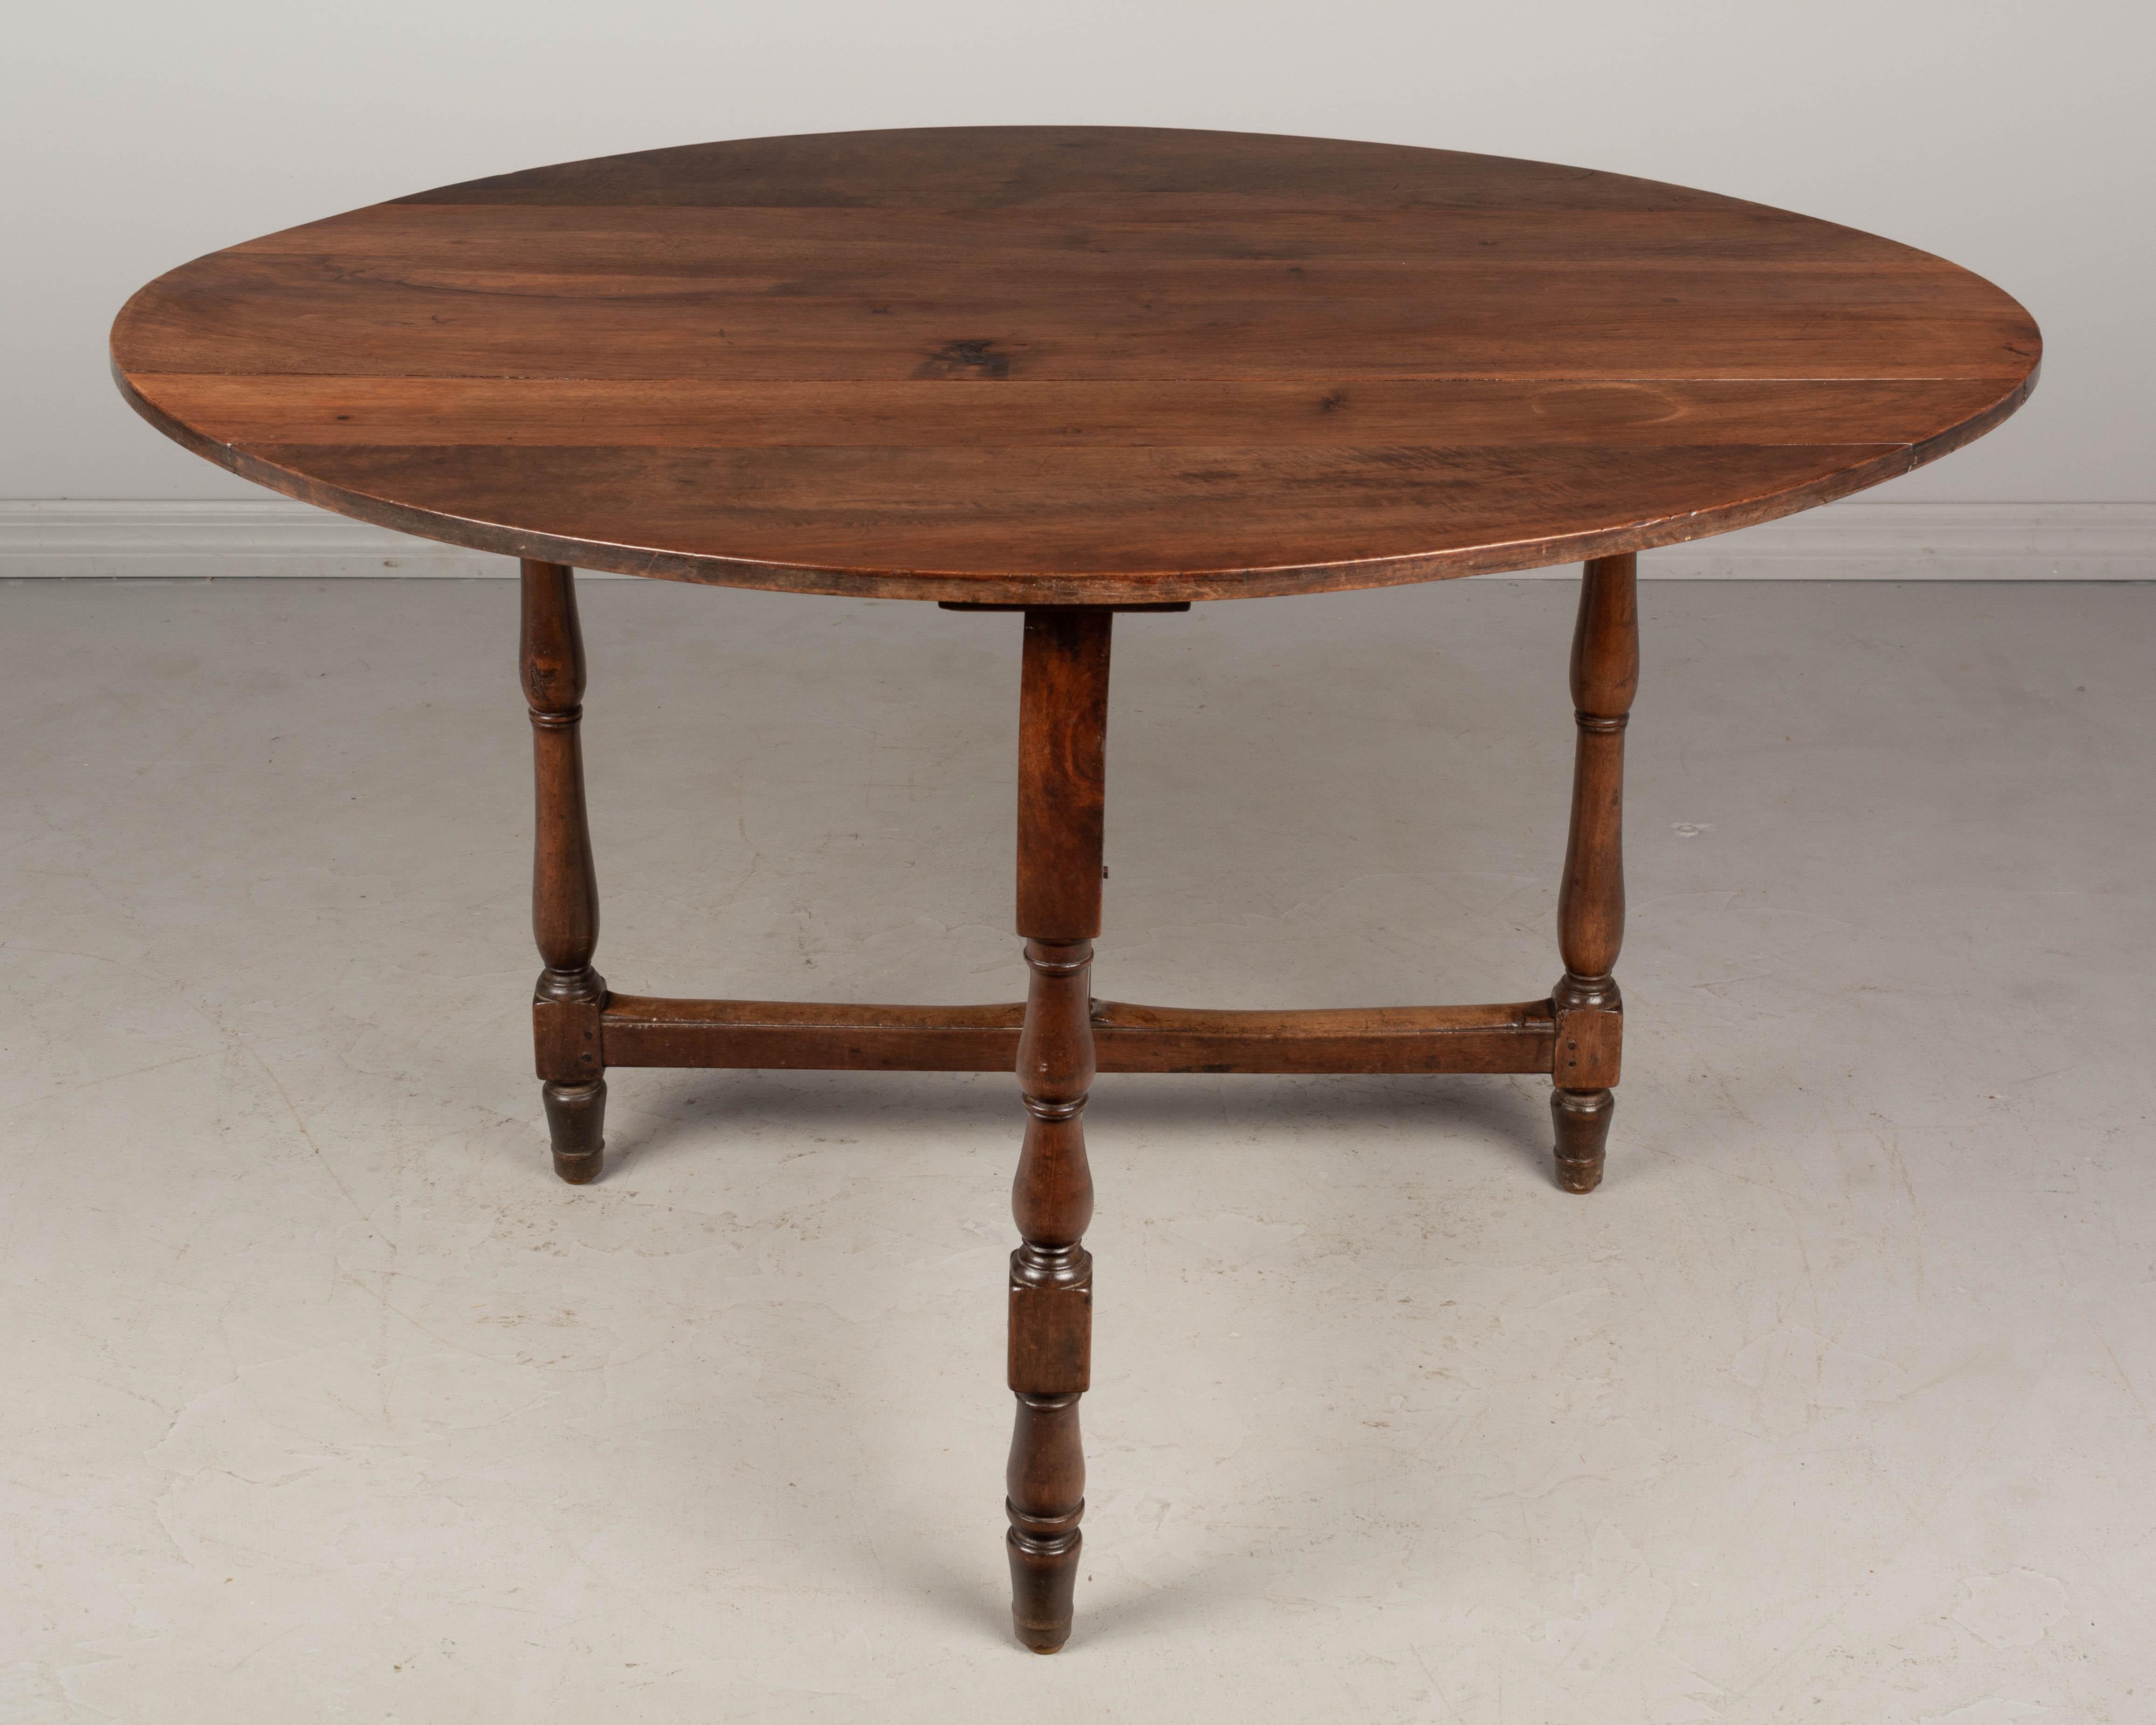 A 19th century French Louis Philippe style oval folding dining table made of solid walnut. Sturdy gate base with three turned legs. Sturdy and well crafted with mortise and tenon joints and pegged construction. Good original condition. Waxed patina.